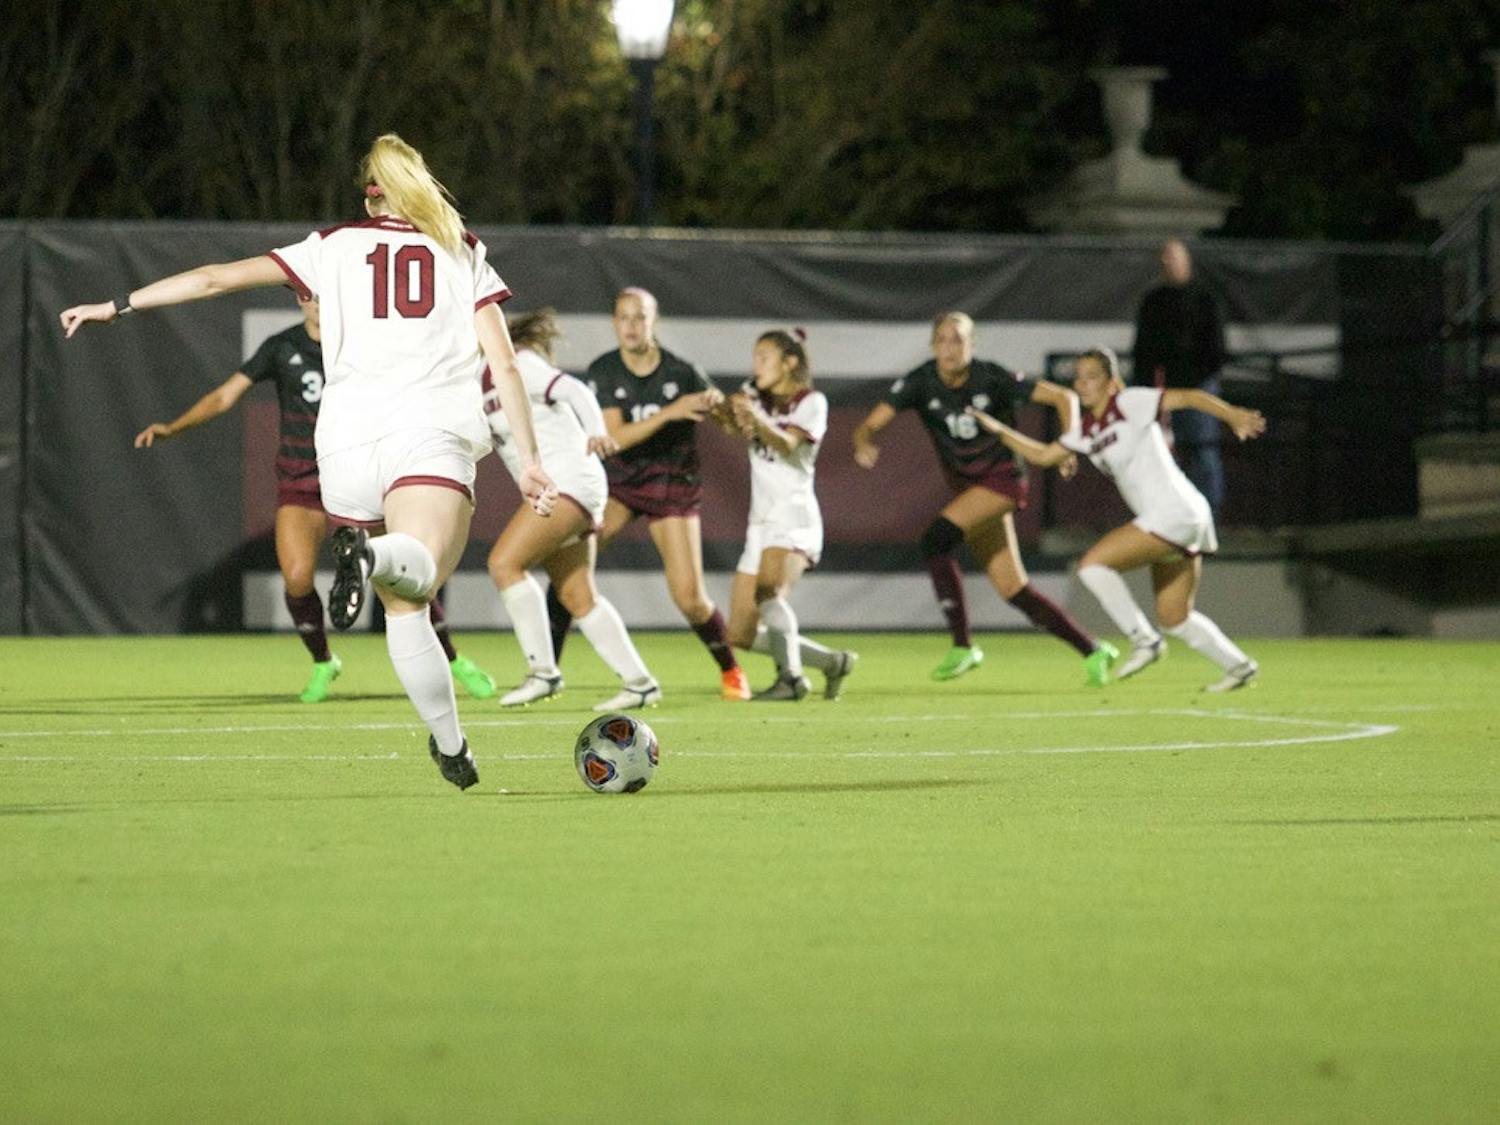 Junior forward Catherine Barry kicks the ball during a match against Texas A&amp;M on Oct. 20, 2022. The Gamecocks and Aggies tied 1-1.&nbsp;